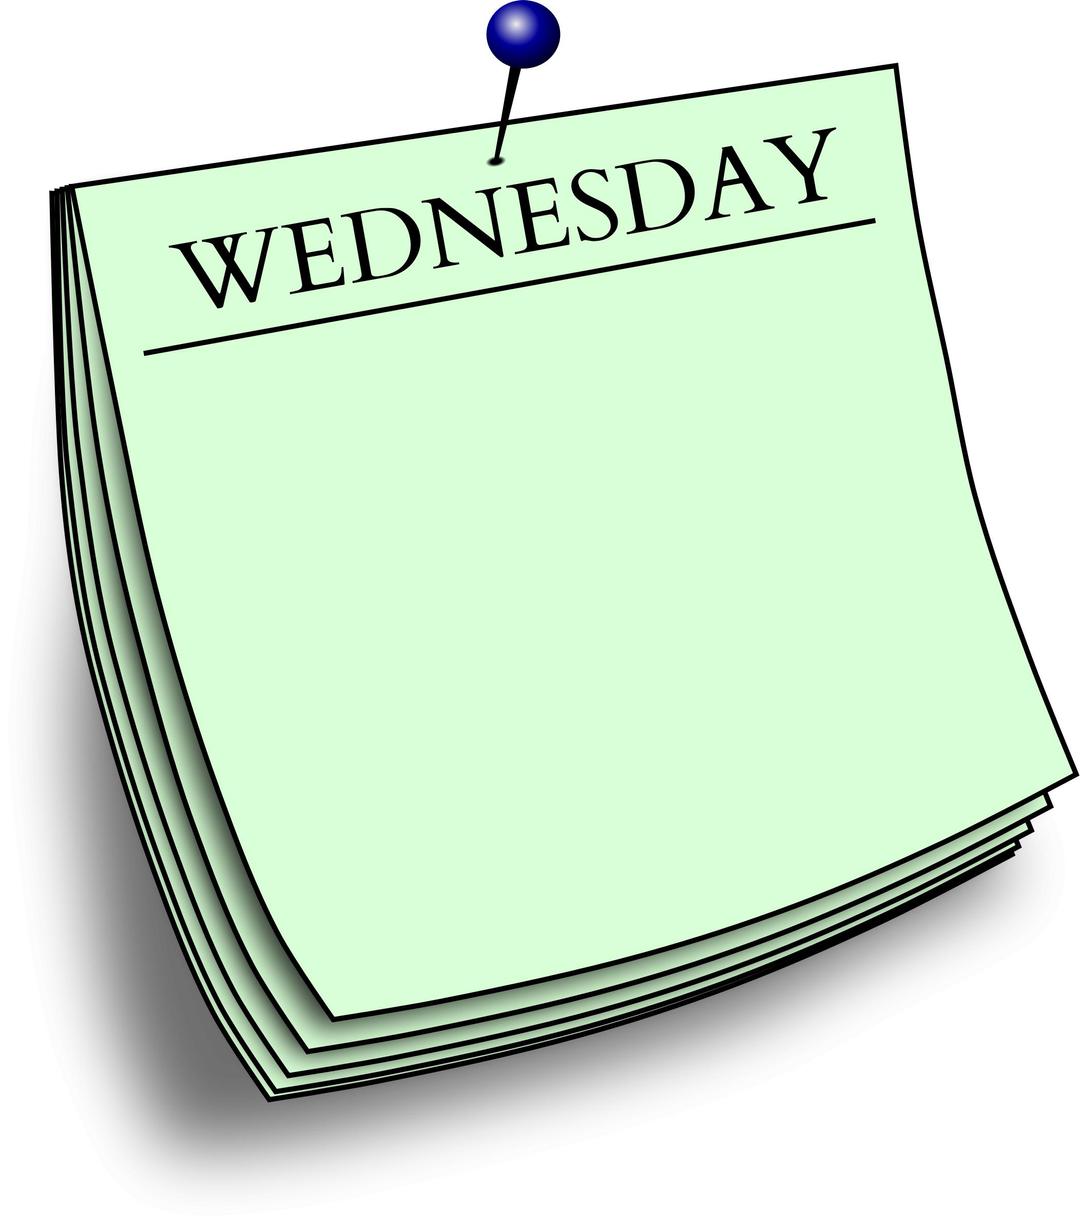 Daily note - Wednesday png transparent